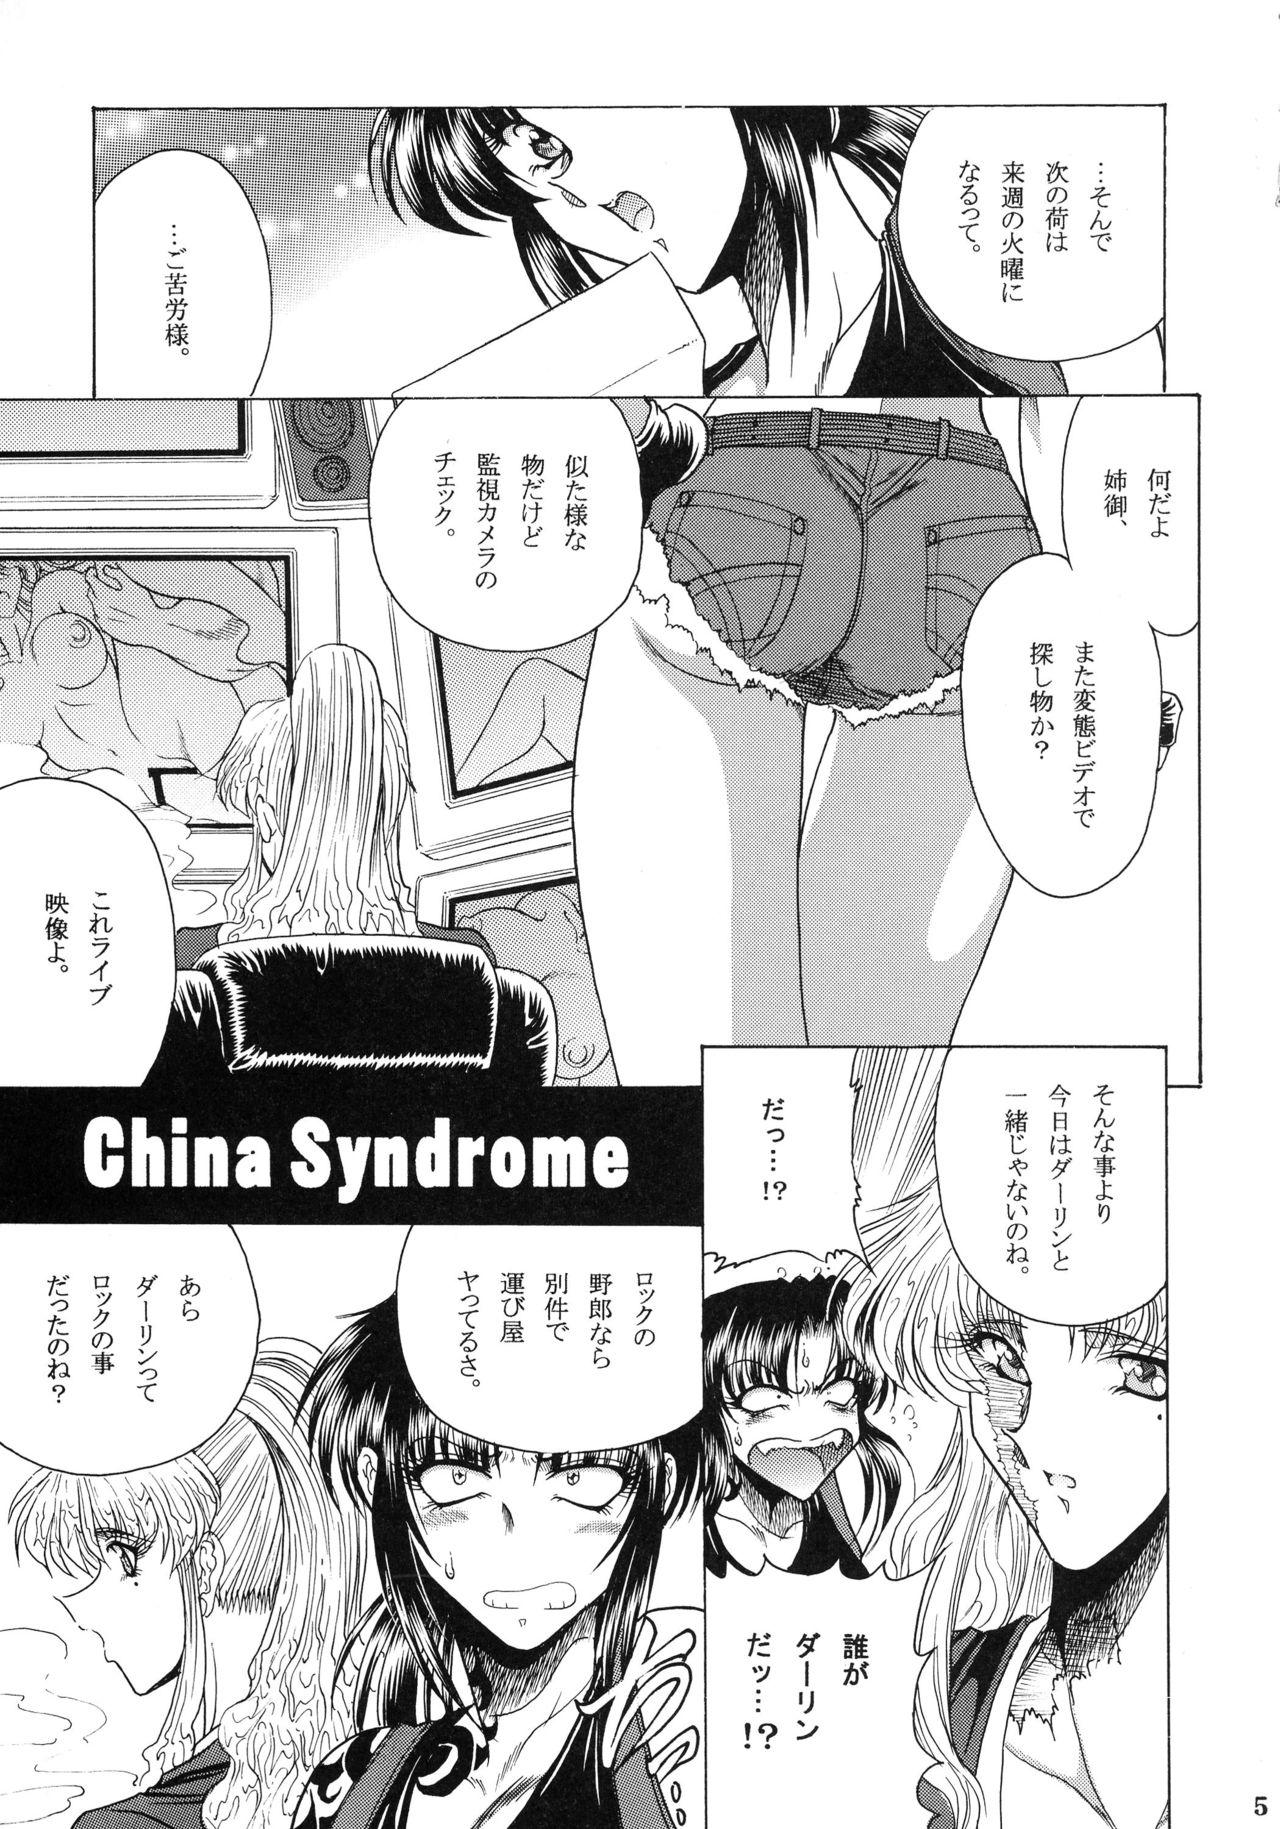 Cop ZONE 38 China Syndrome - Black lagoon Affair - Page 4